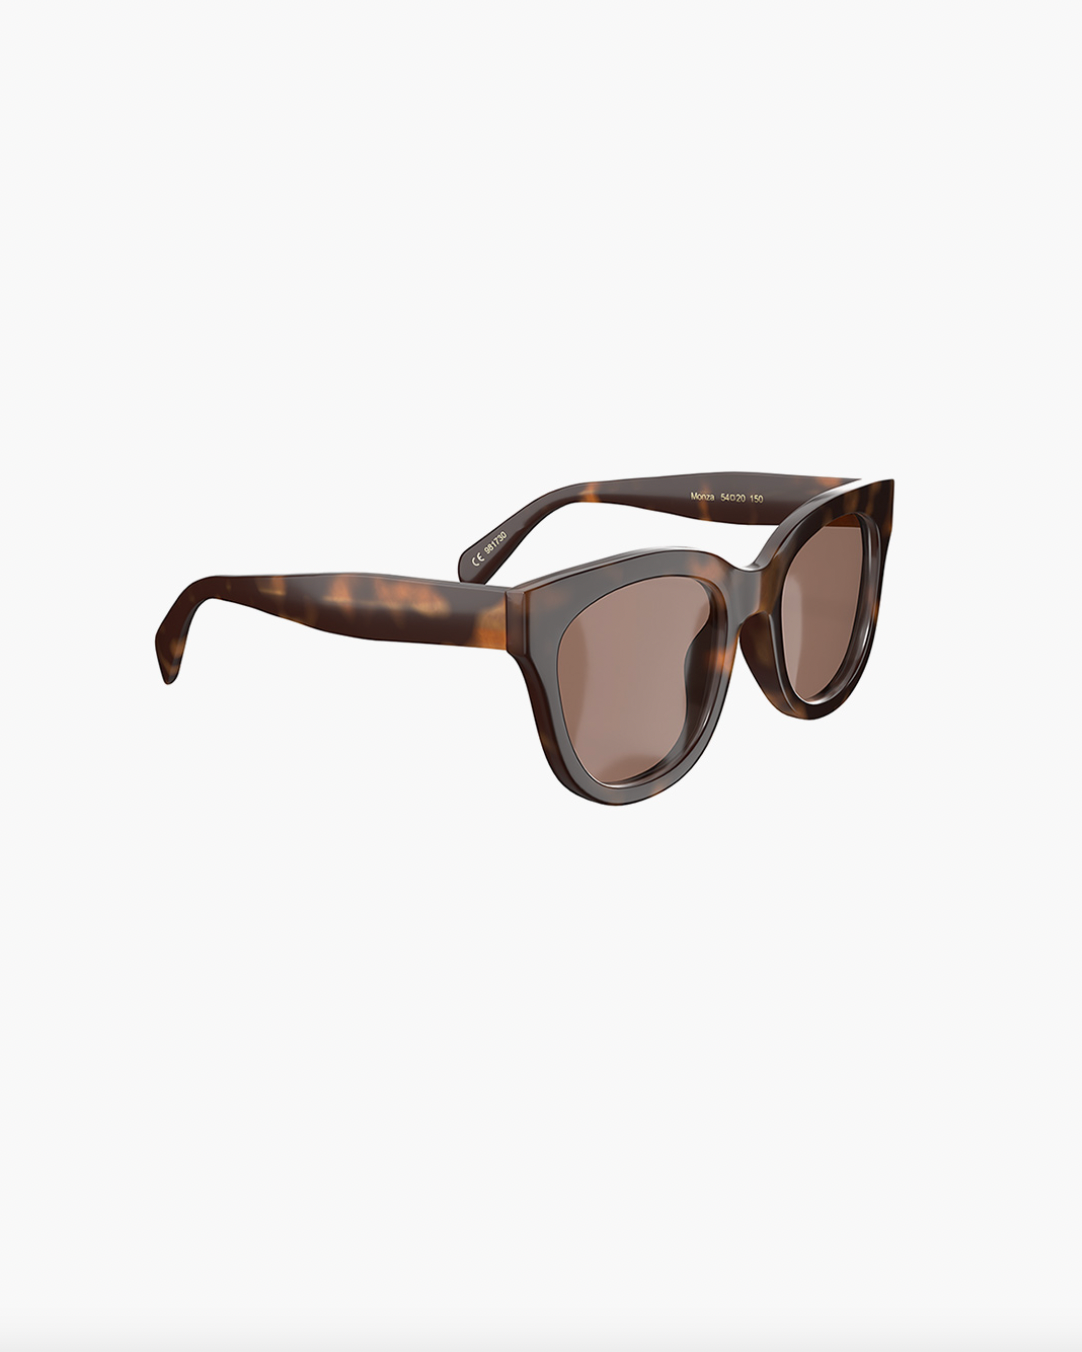 Get ready to turn heads with our Monza Tortoise Brown sunglasses by Corlin Eyewear. These sunglasses feature UV protection 400 and scratch-resistant CR39 lenses, perfect for any outdoor activity.